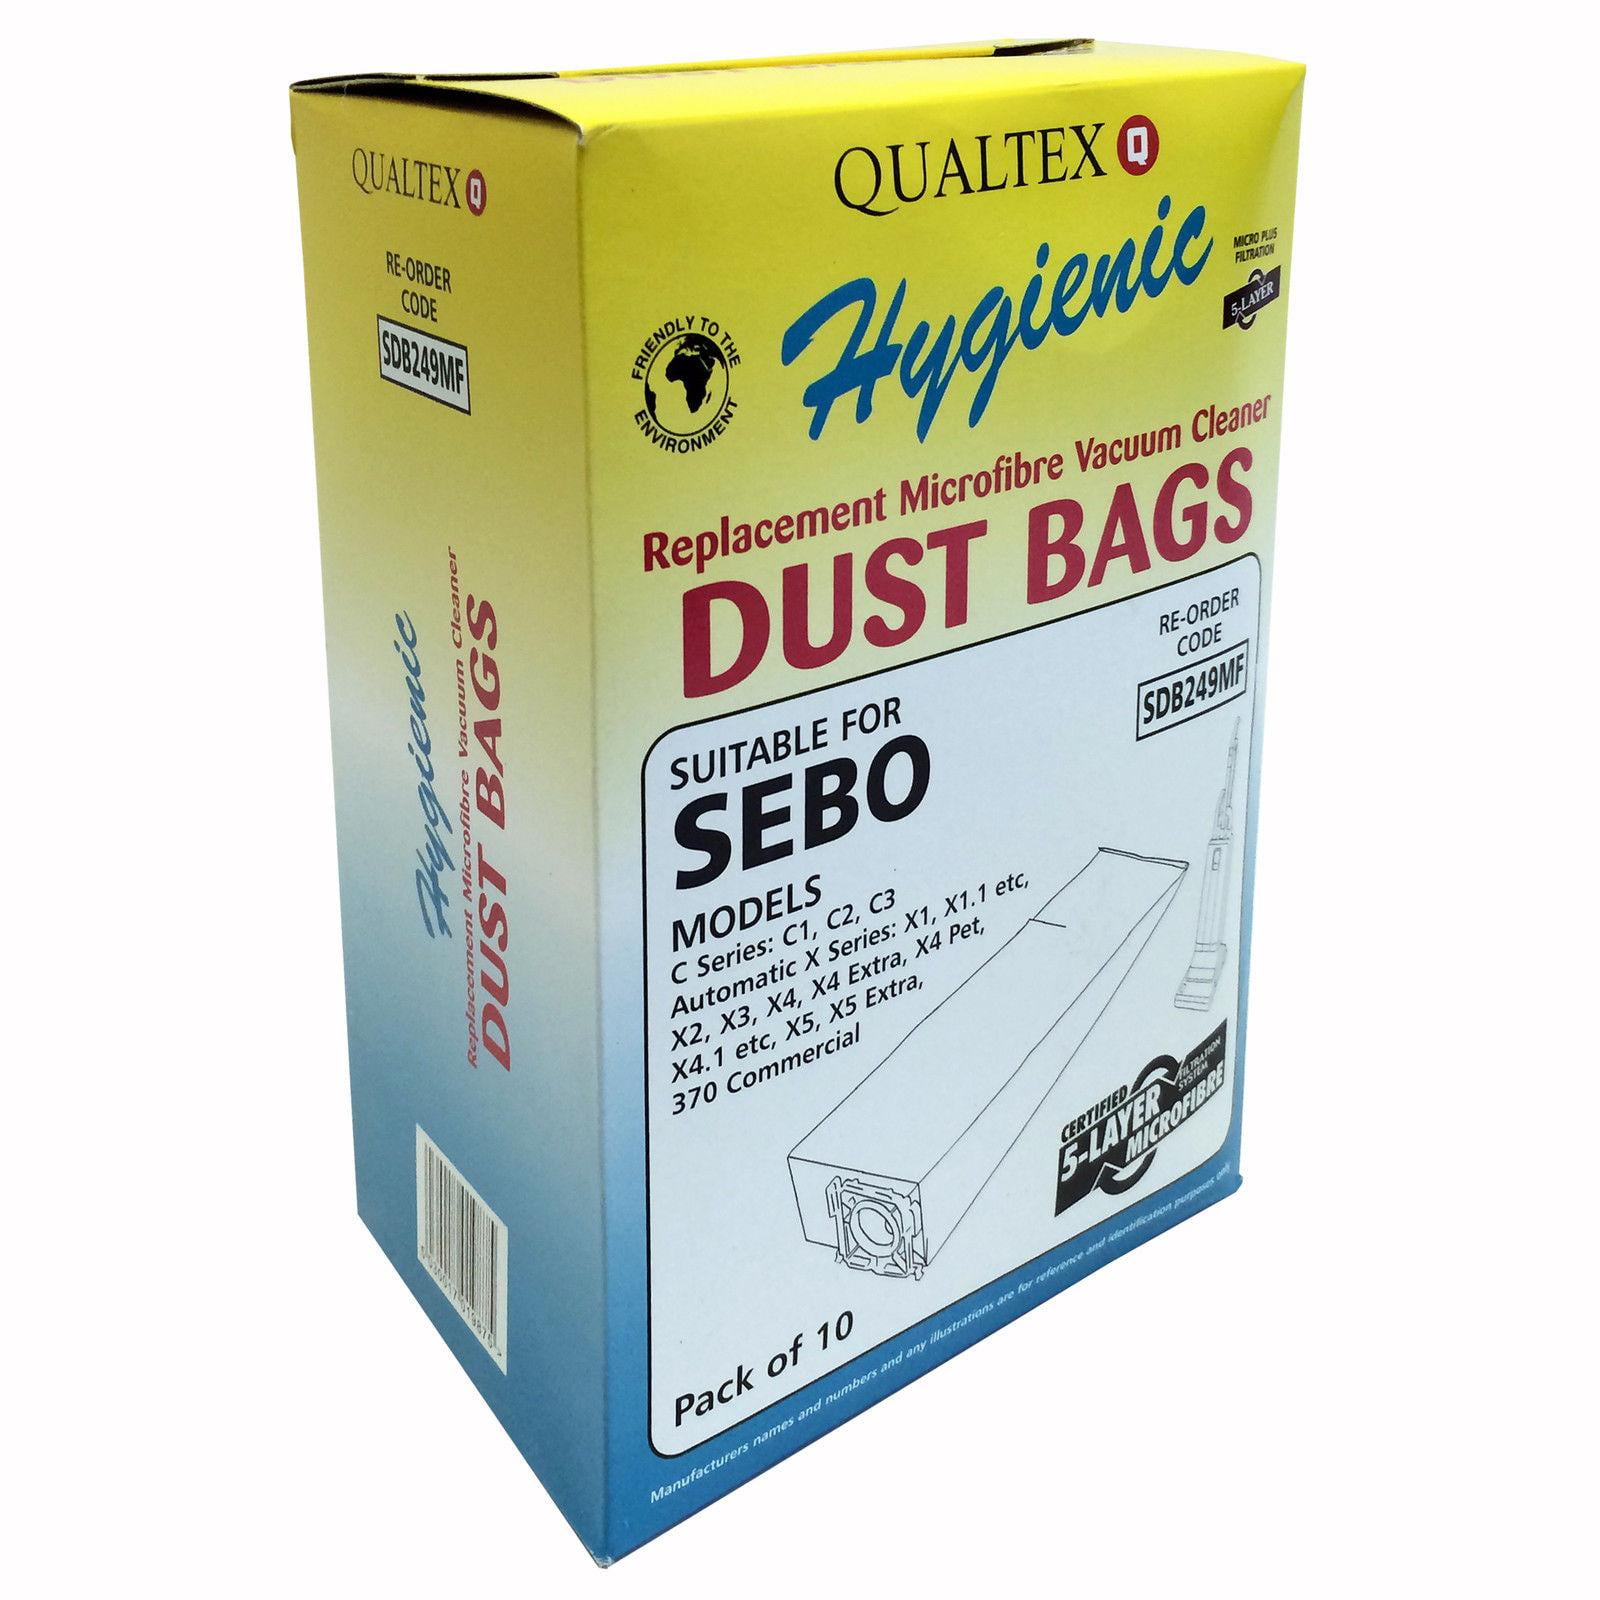 5 X QUALTEX HYGIENIC REPLACEMENT VACUM CLEANER DUST BAGS FOR HOOVER MODELS 